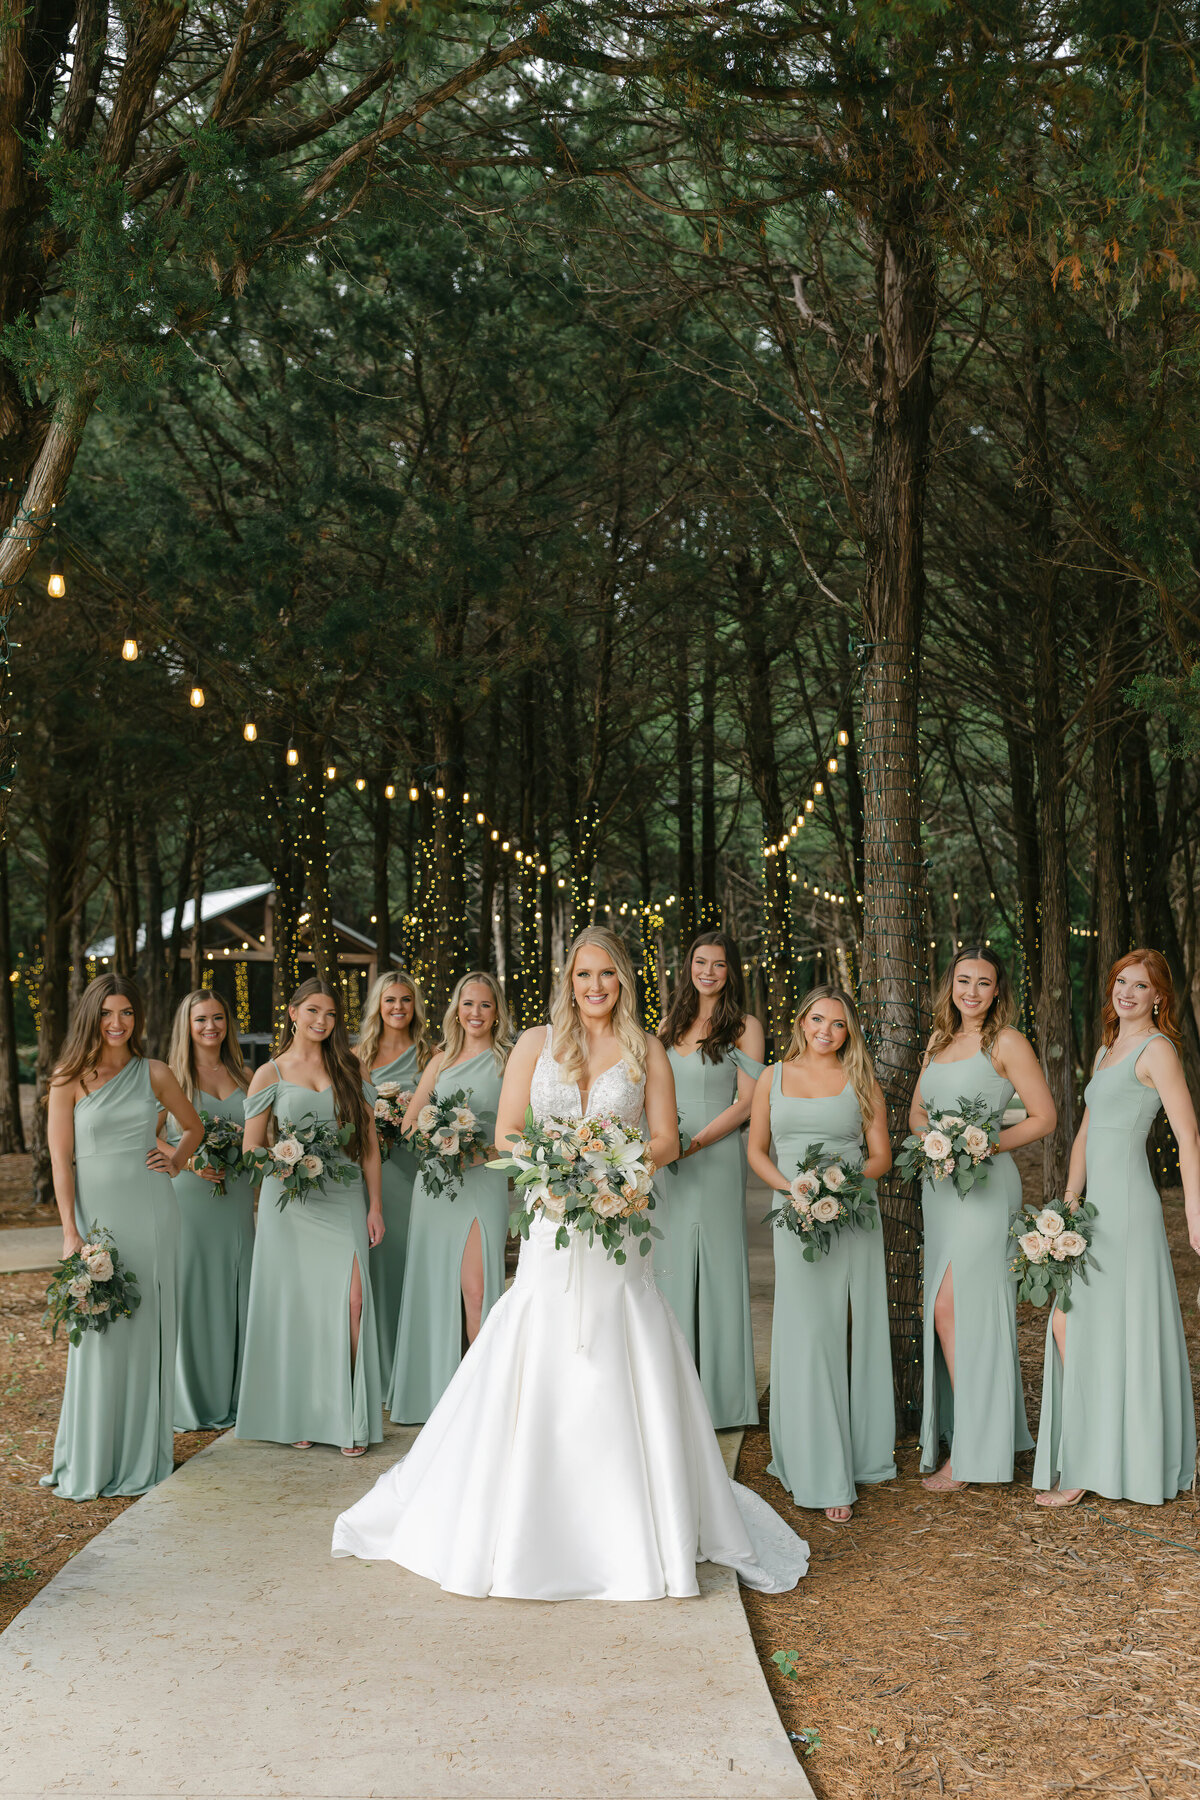 bride with bridesmaids in mint dresses